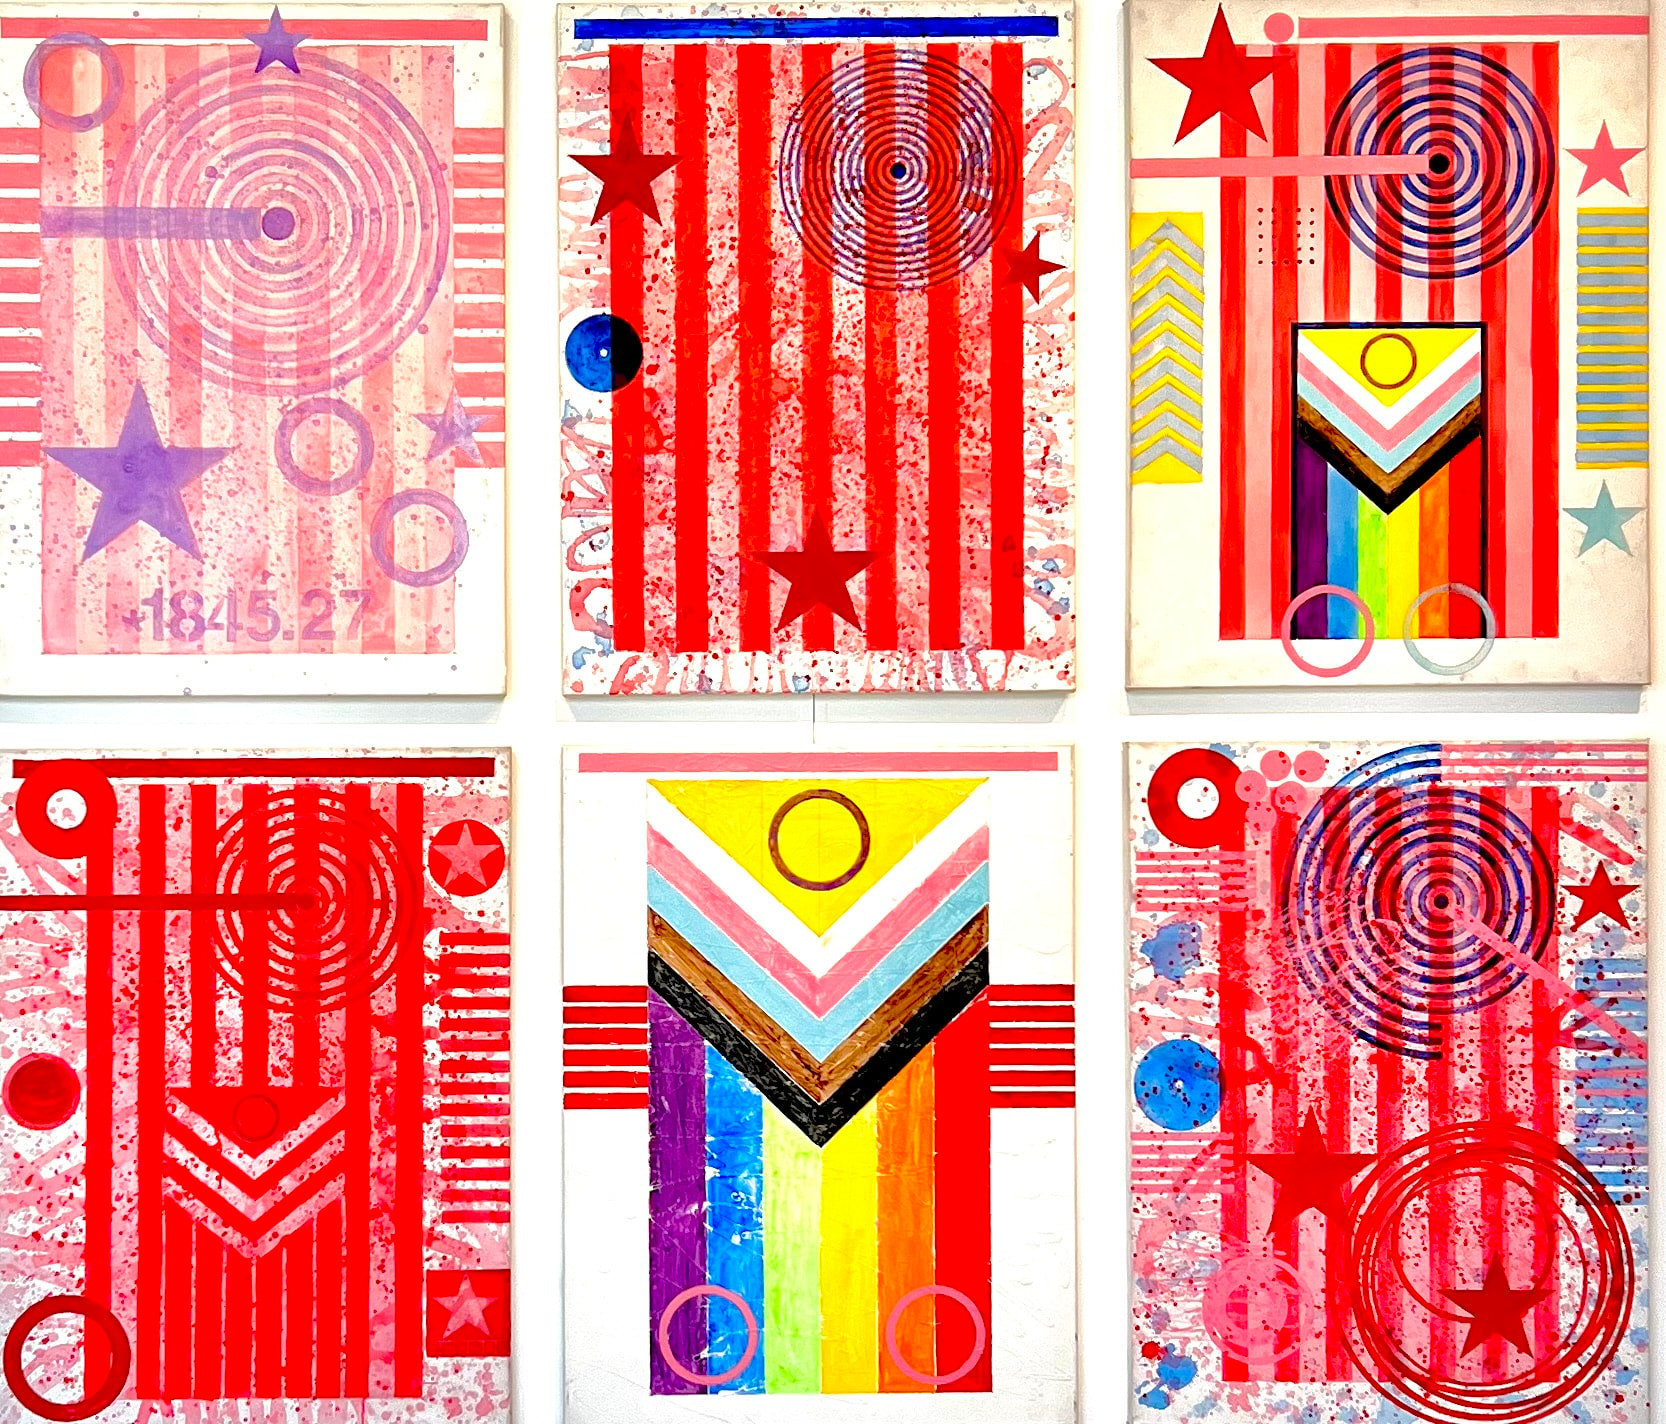 J. Steven Manolis (1948),&amp;nbsp;American Flag (Sextet), 2023, 88 x 120 inches. Top left to right:&amp;nbsp;The Pastel Paradise, Florida American Flag, 2023,&amp;nbsp;The Steady State American Flag, 2023,&amp;nbsp;The Embracing, Loving, and All-Inclusive American Flag, 2023,&amp;nbsp;The REDWORLD Flag, 2023,&amp;nbsp;The LGBTQ1A+ American Flag, 2023,&amp;nbsp;The Off-Kilter Unbalanced American Flag, 2023, Each Work: Acrylic on canvas, 40 x 30 inches